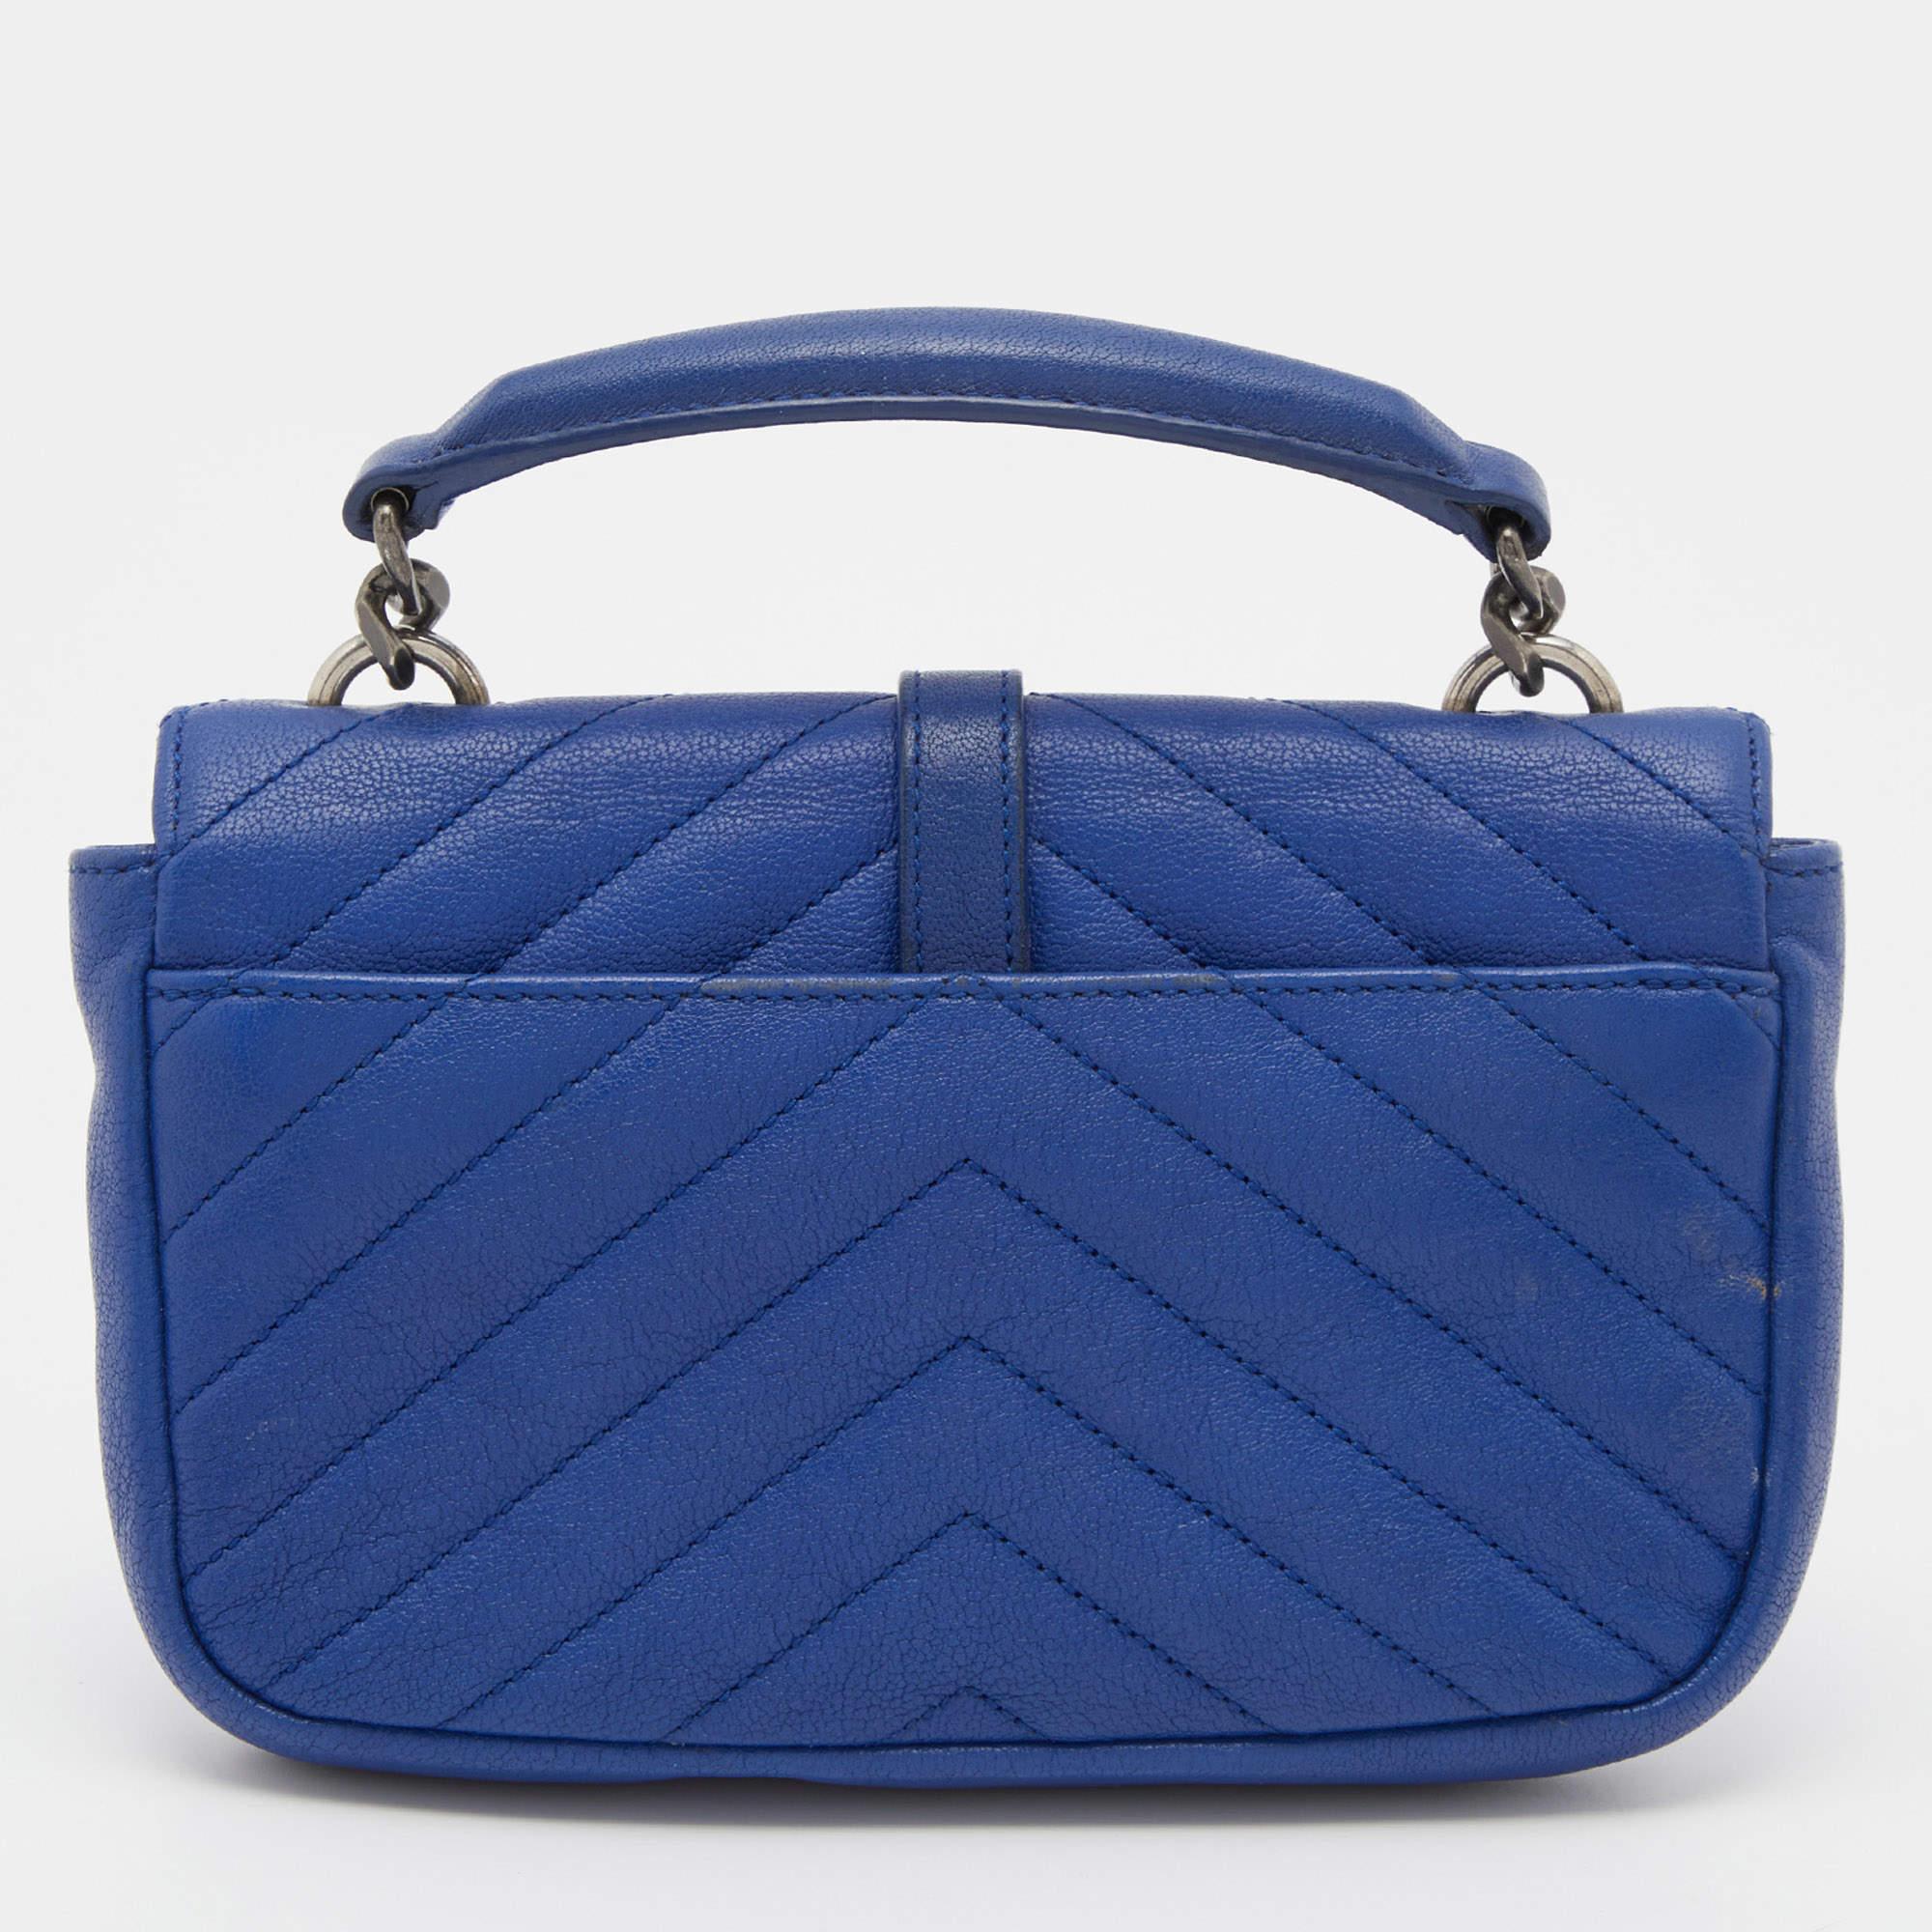 This bag from the house of Saint Laurent is an accessory you would go to season after season. It has been crafted from blue leather into a flap style. It comes with a top handle, a front logo detail, and a well-lined interior.

Includes: Detachable